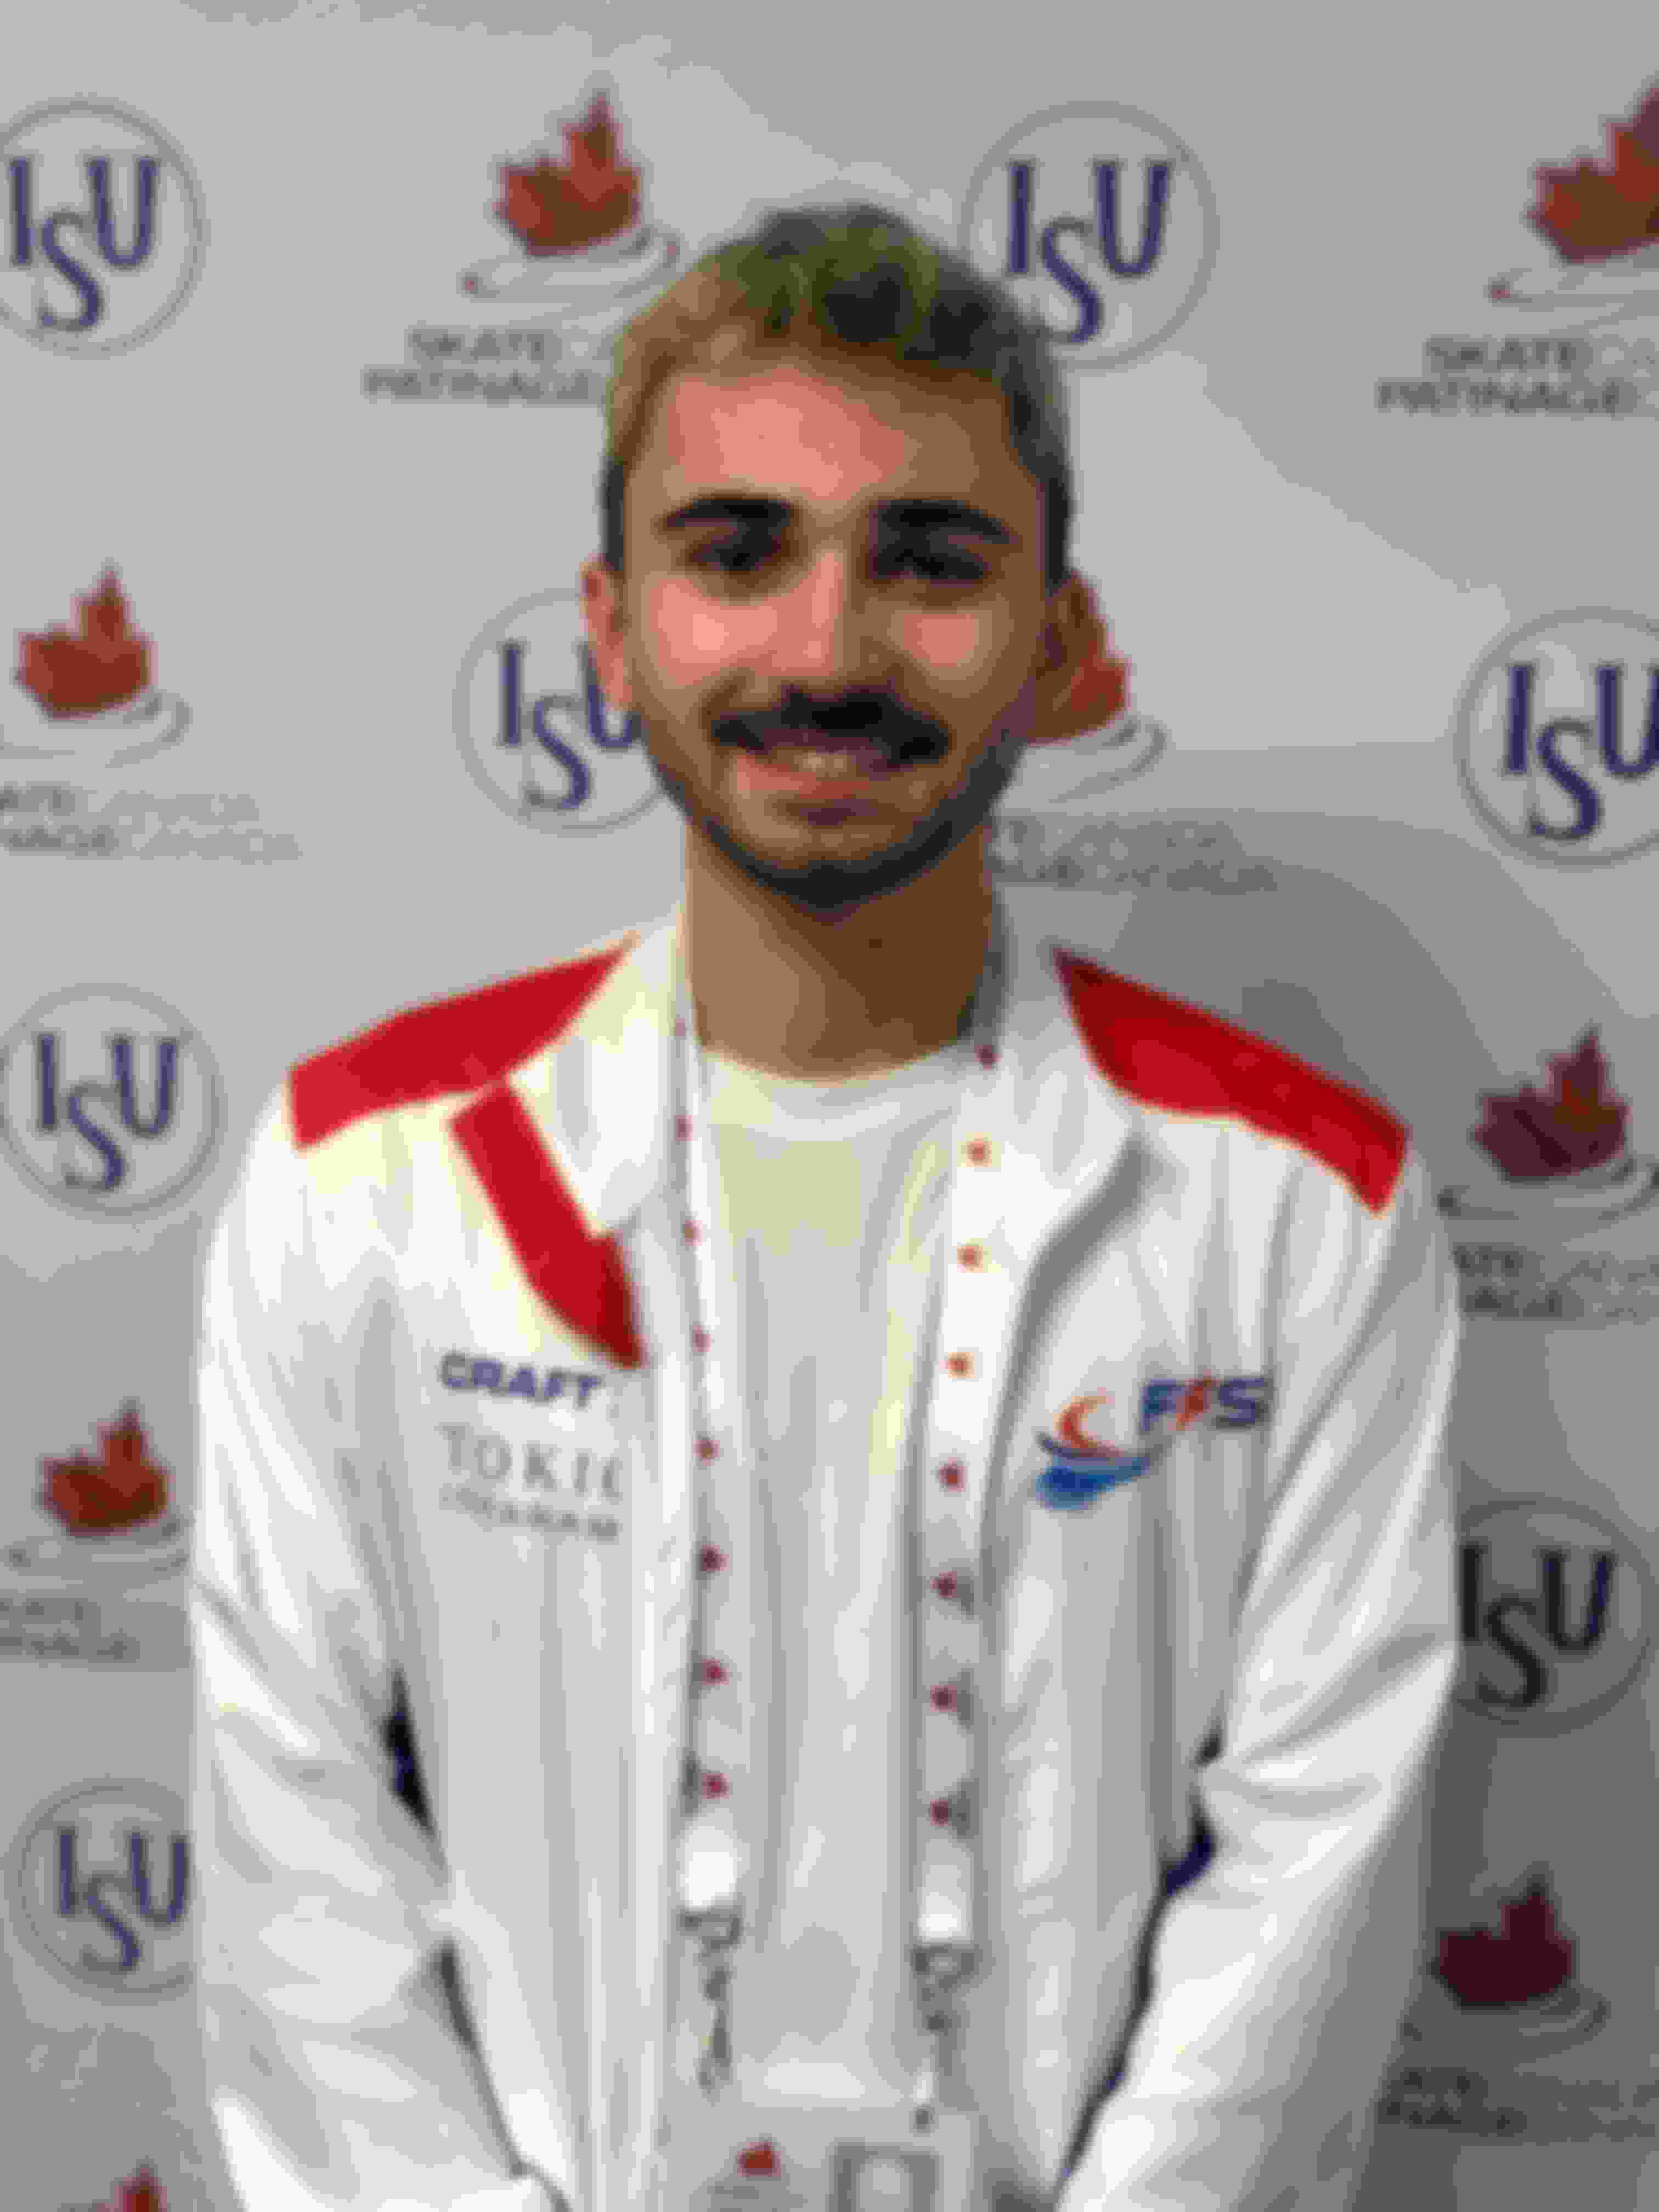 Short program runner-up Kevin Aymoz in the mixed zone at the Autumn Classic International